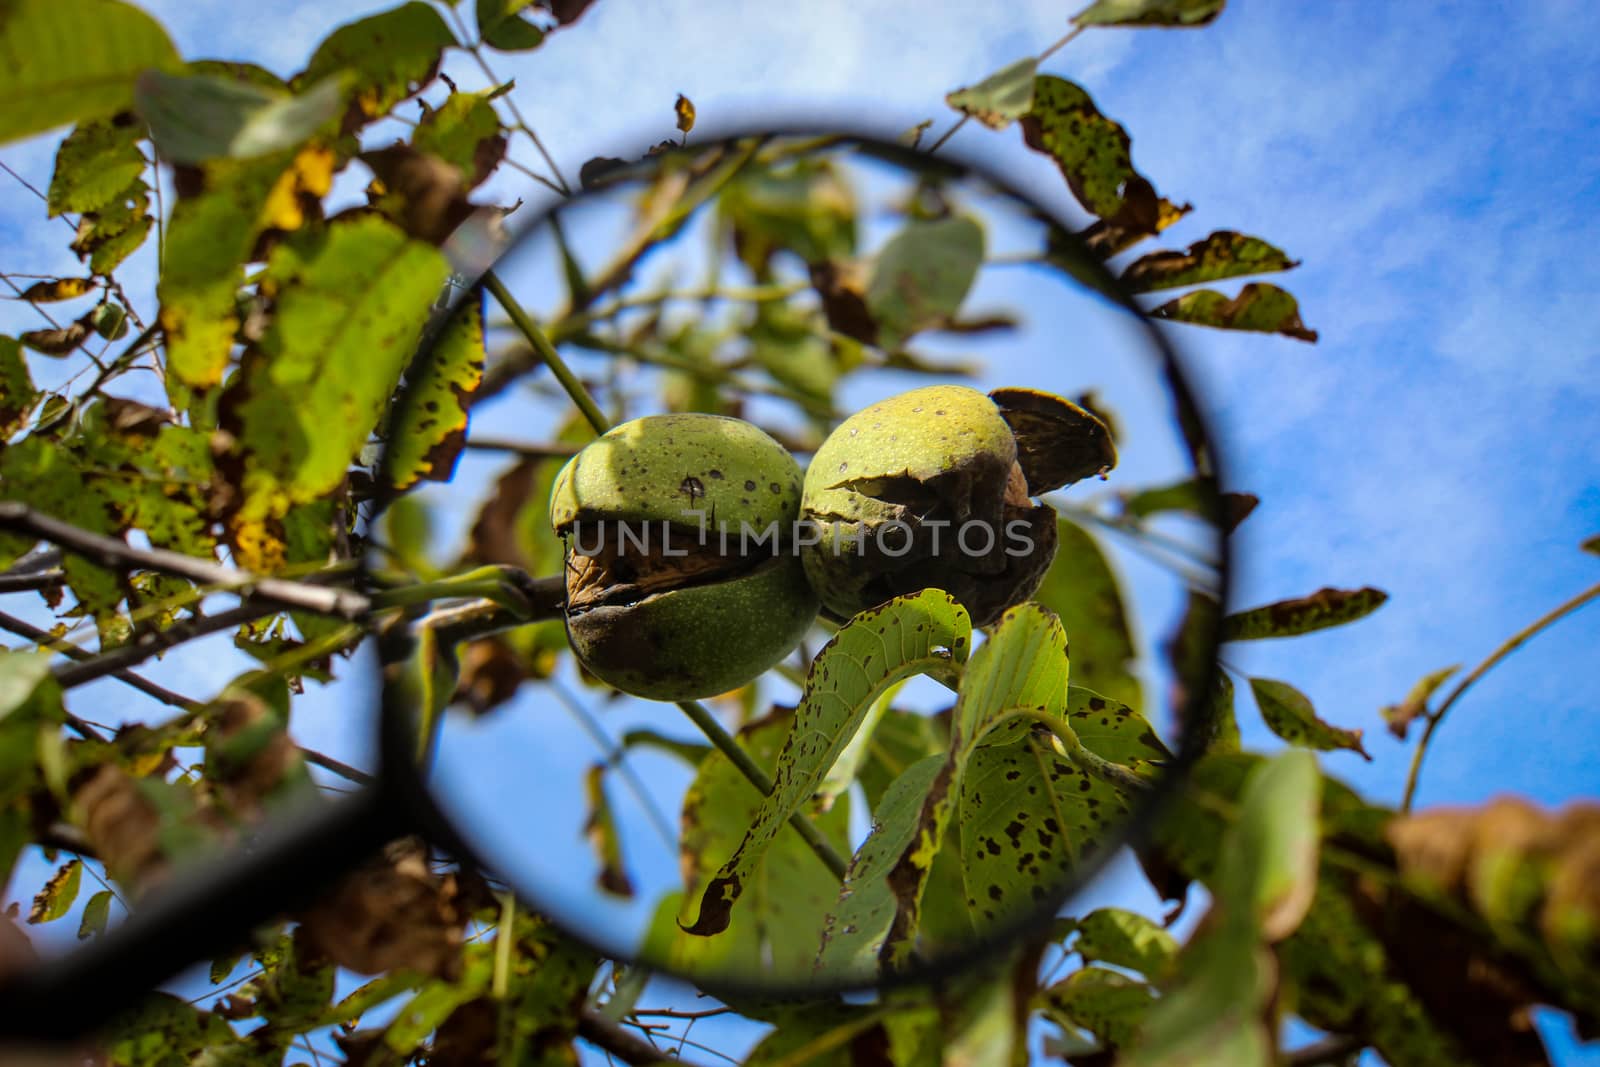 Walnut fruit enlarged with a magnifying glass. Close up of a ripe walnut inside a cracked green shell on a branch with the sky in the background. by mahirrov